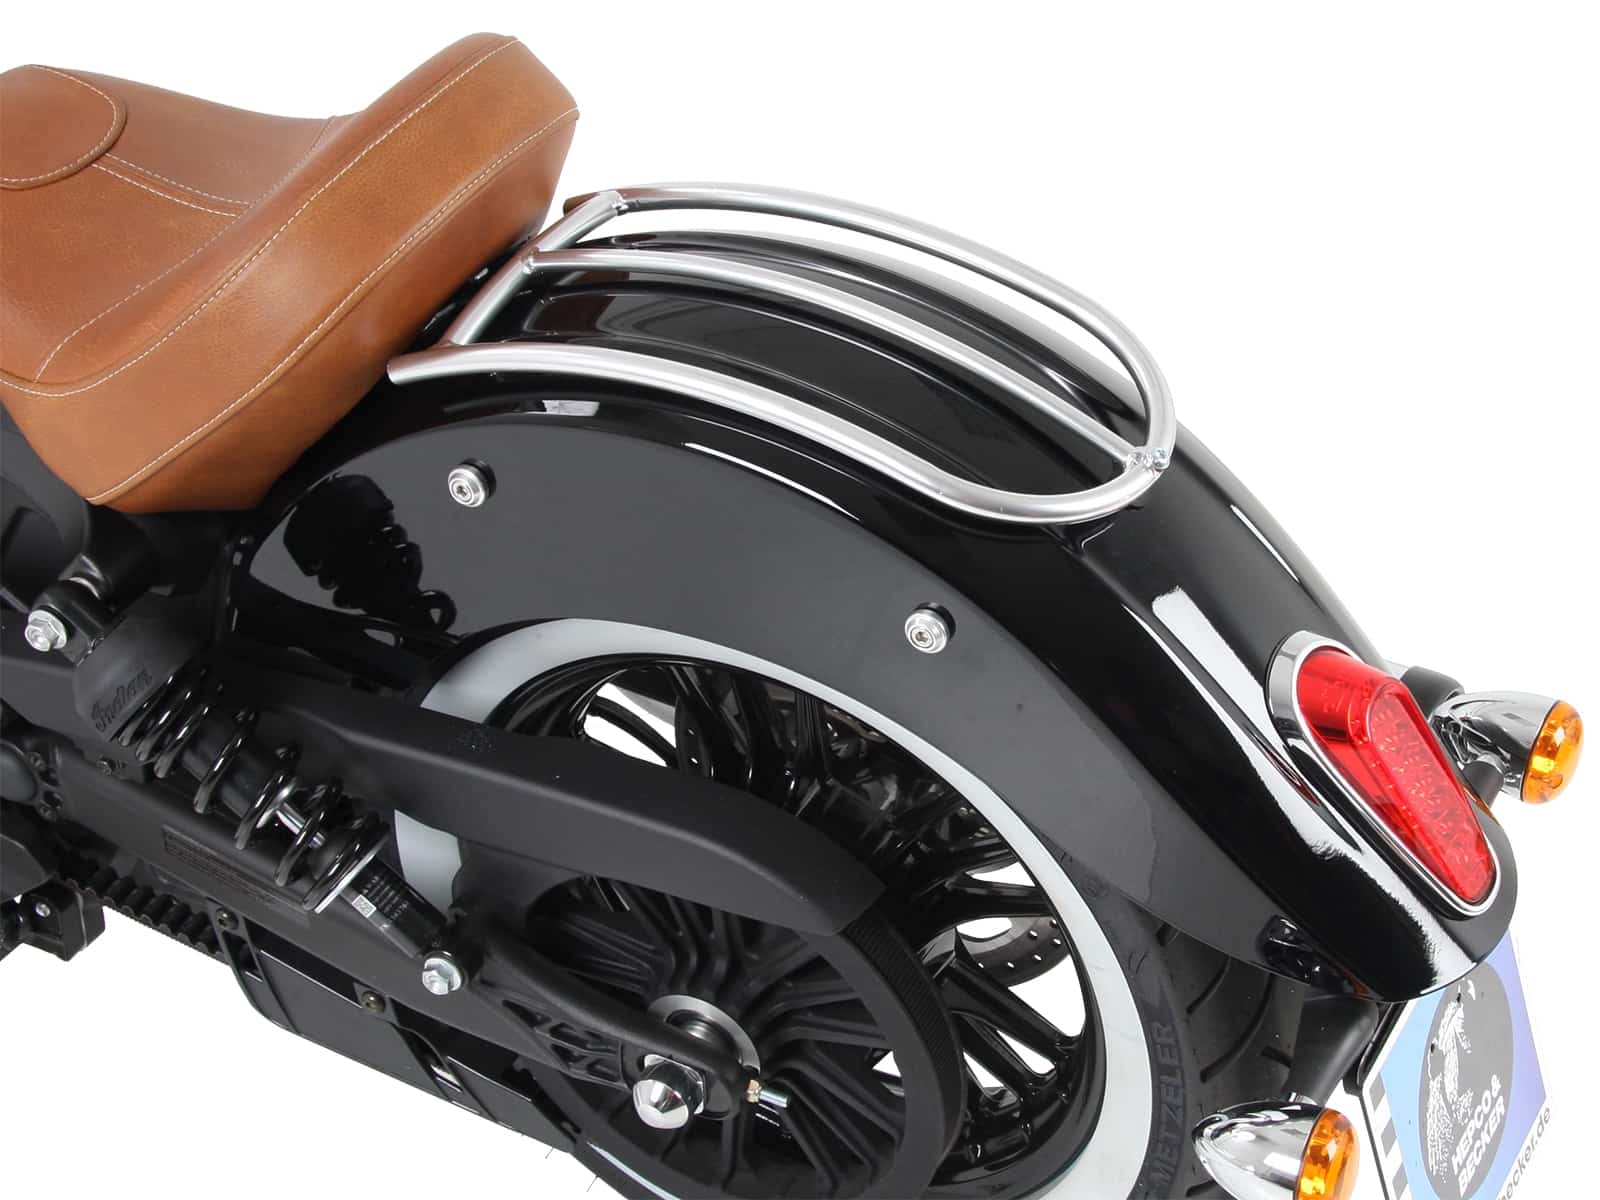 Reling chrom für Indian Scout/Sixty (2015-)